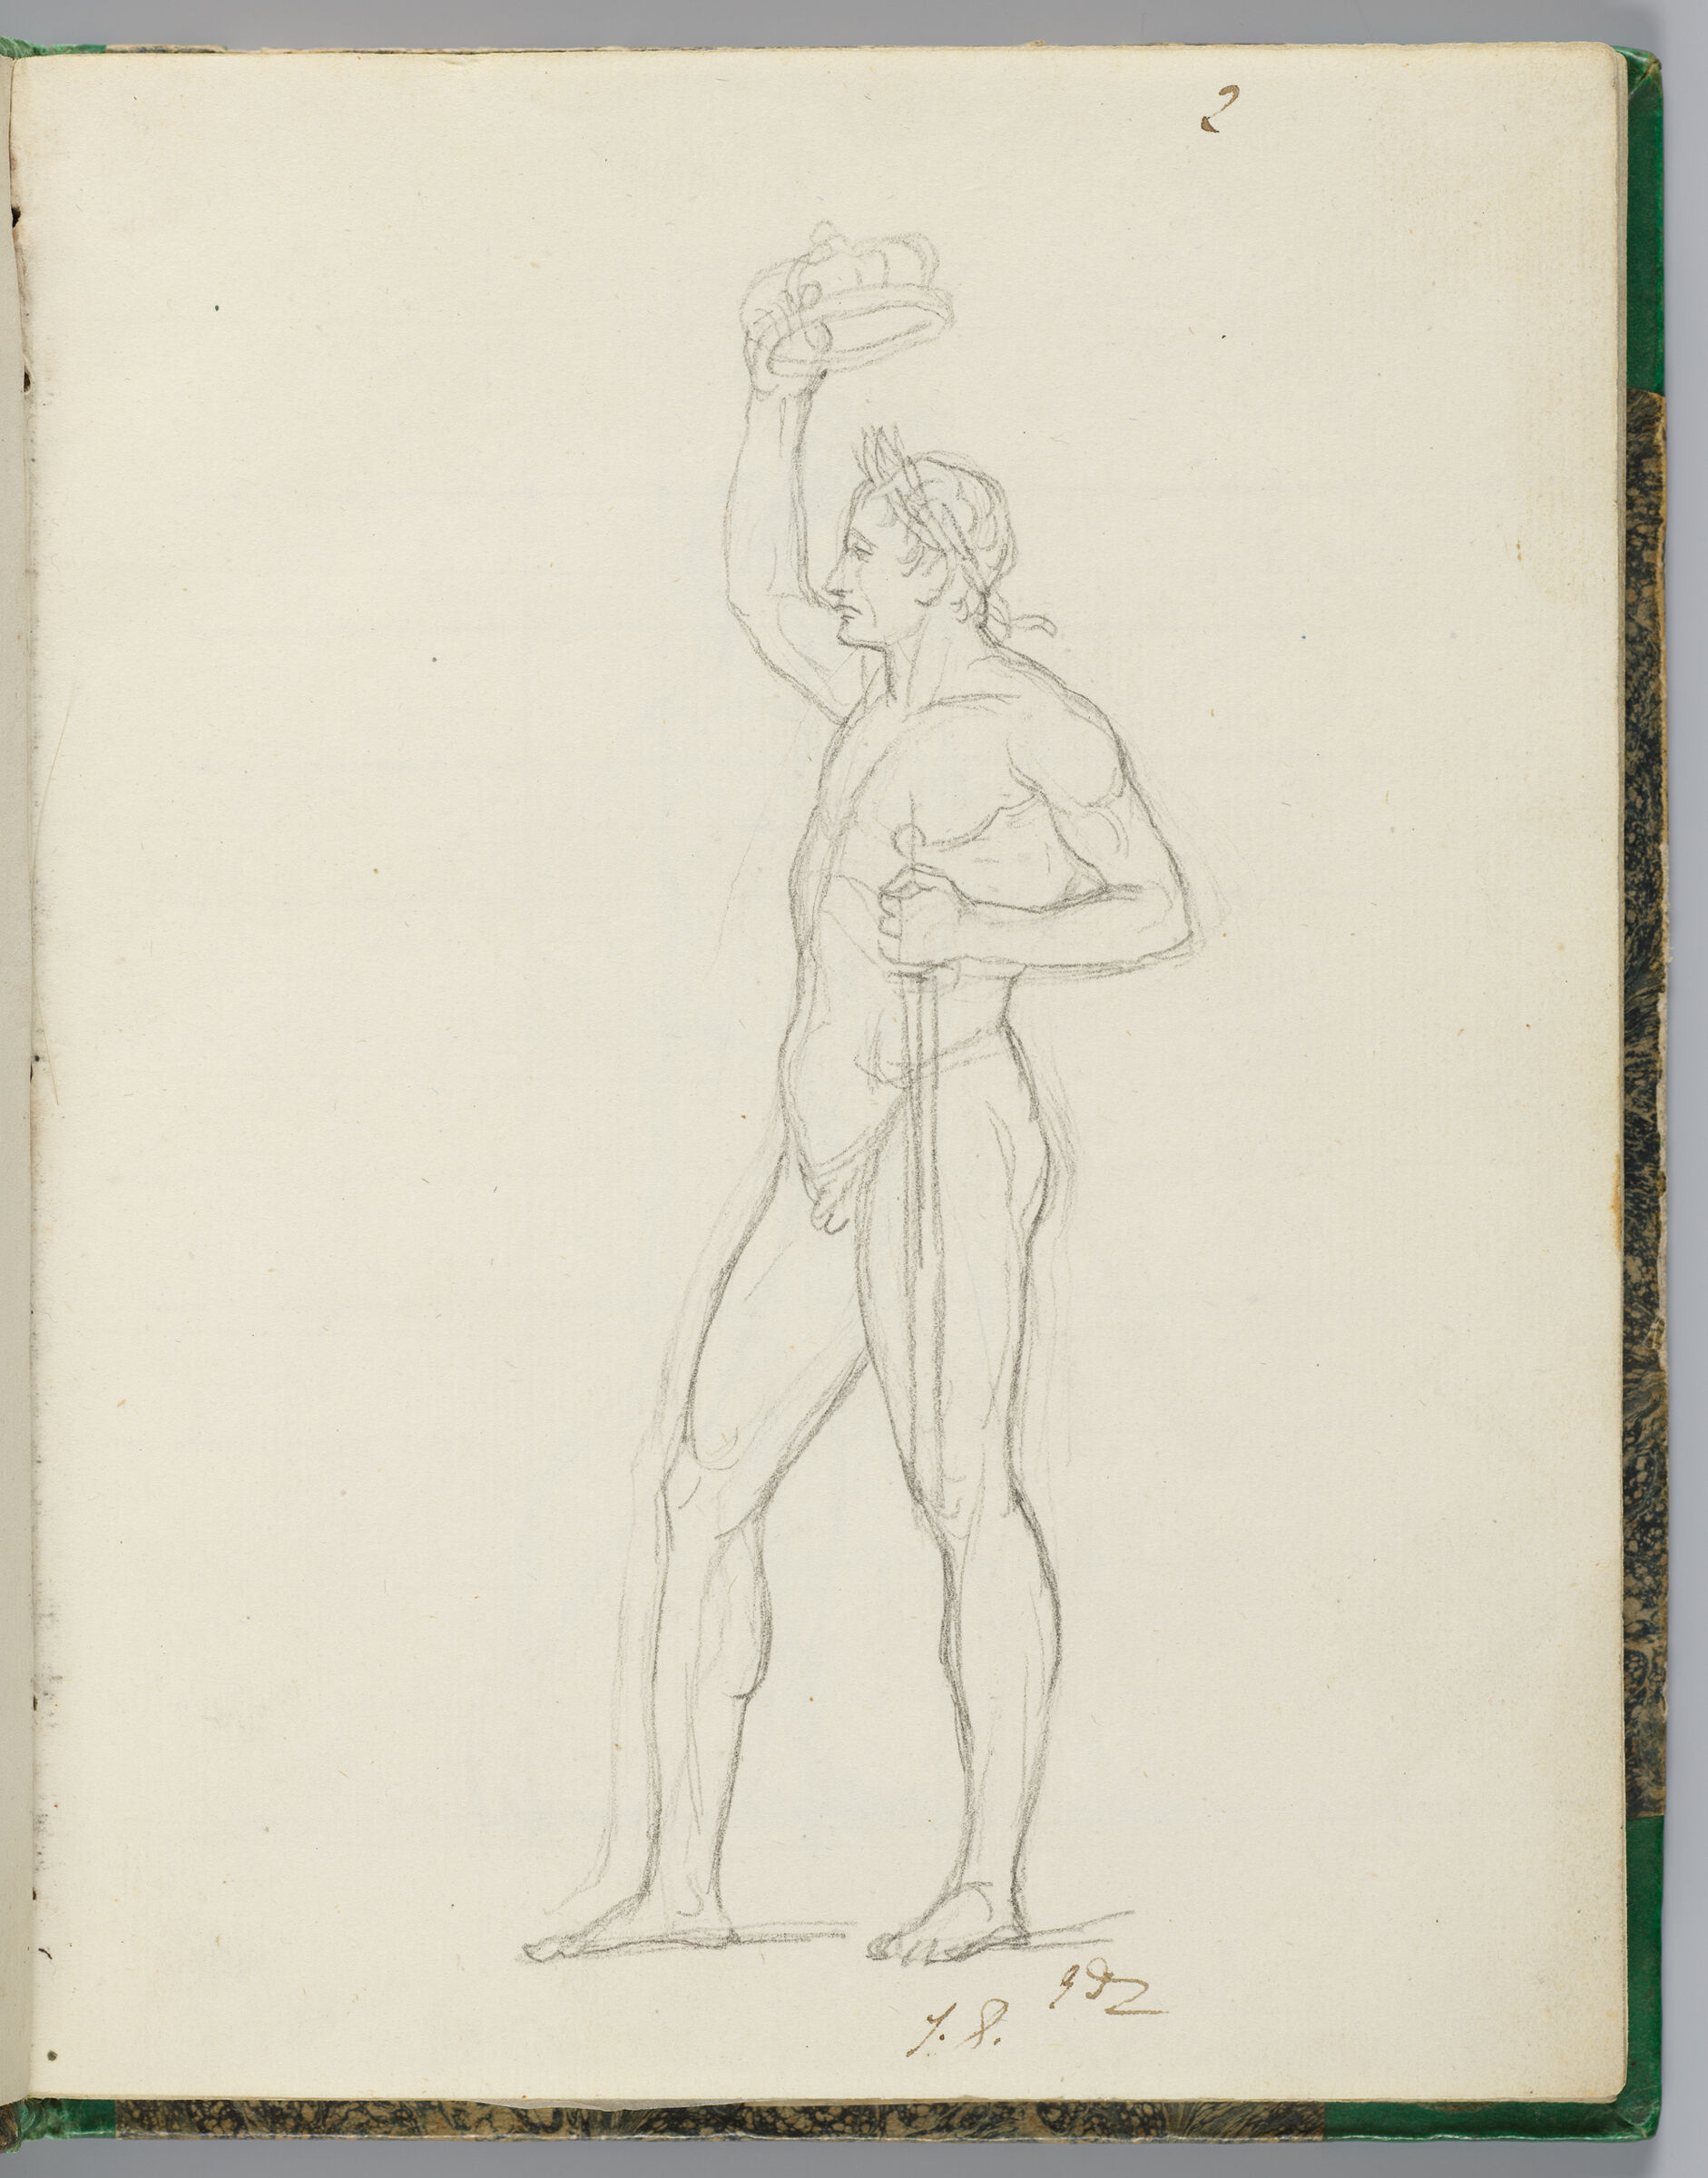 Napoleon, Nude, Crowning Himself While Holding A Sword; Verso: Napoleon, Nude, Crowning Himself